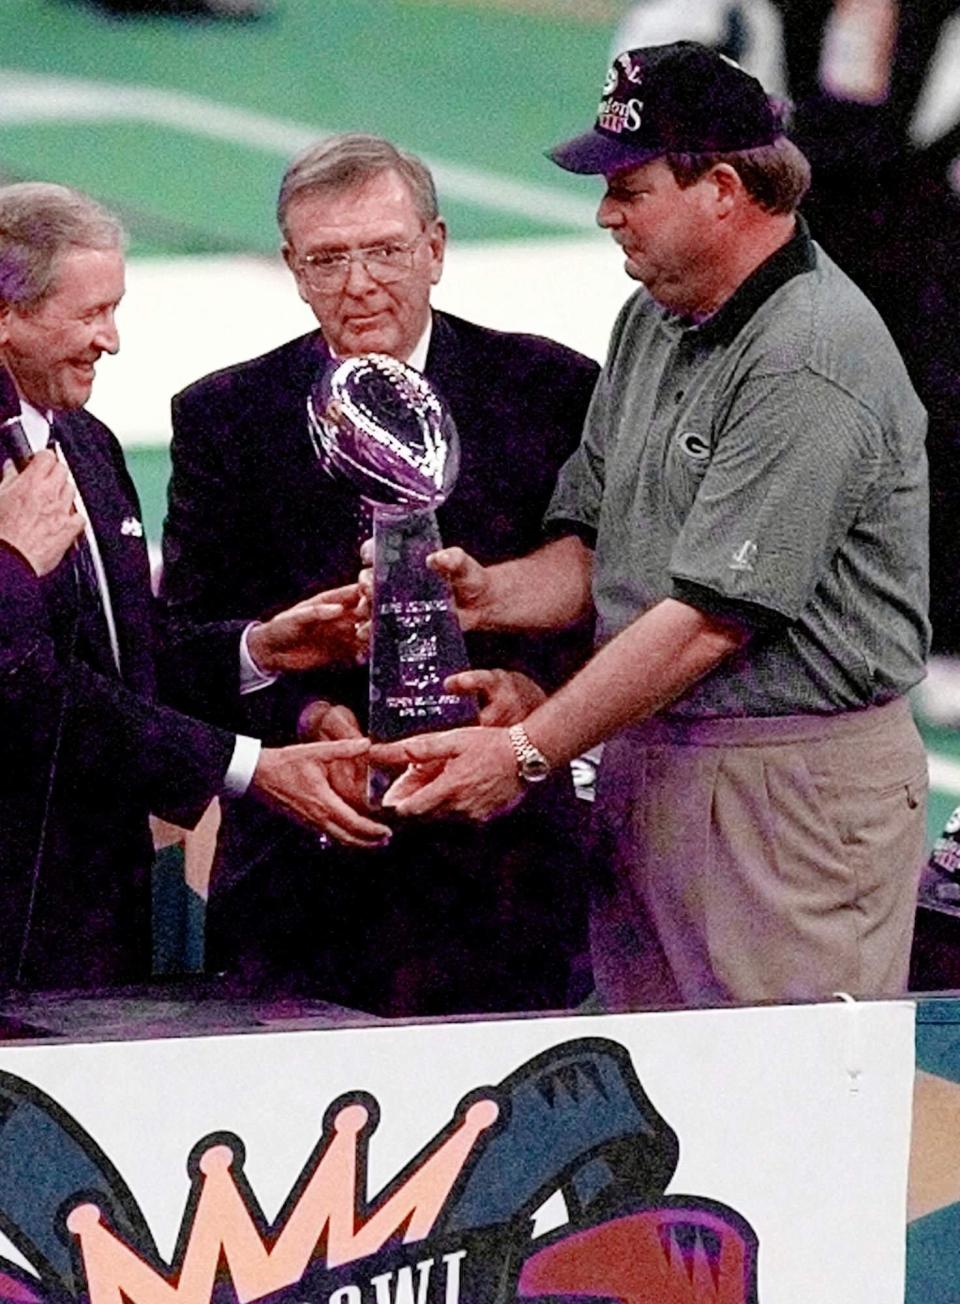 Green Bay Packers President Robert Harlan, left, General Manager Ron Wolf, and coach Mike Holmgren, right, receive the Lombardi Trophy after beating the New England Patriots 35-21 in Super Bowl XXXI  Jan. 26, 1997, in New Orleans. The Packers won 35-21. (AP Photo/Lenny Ignelzi)